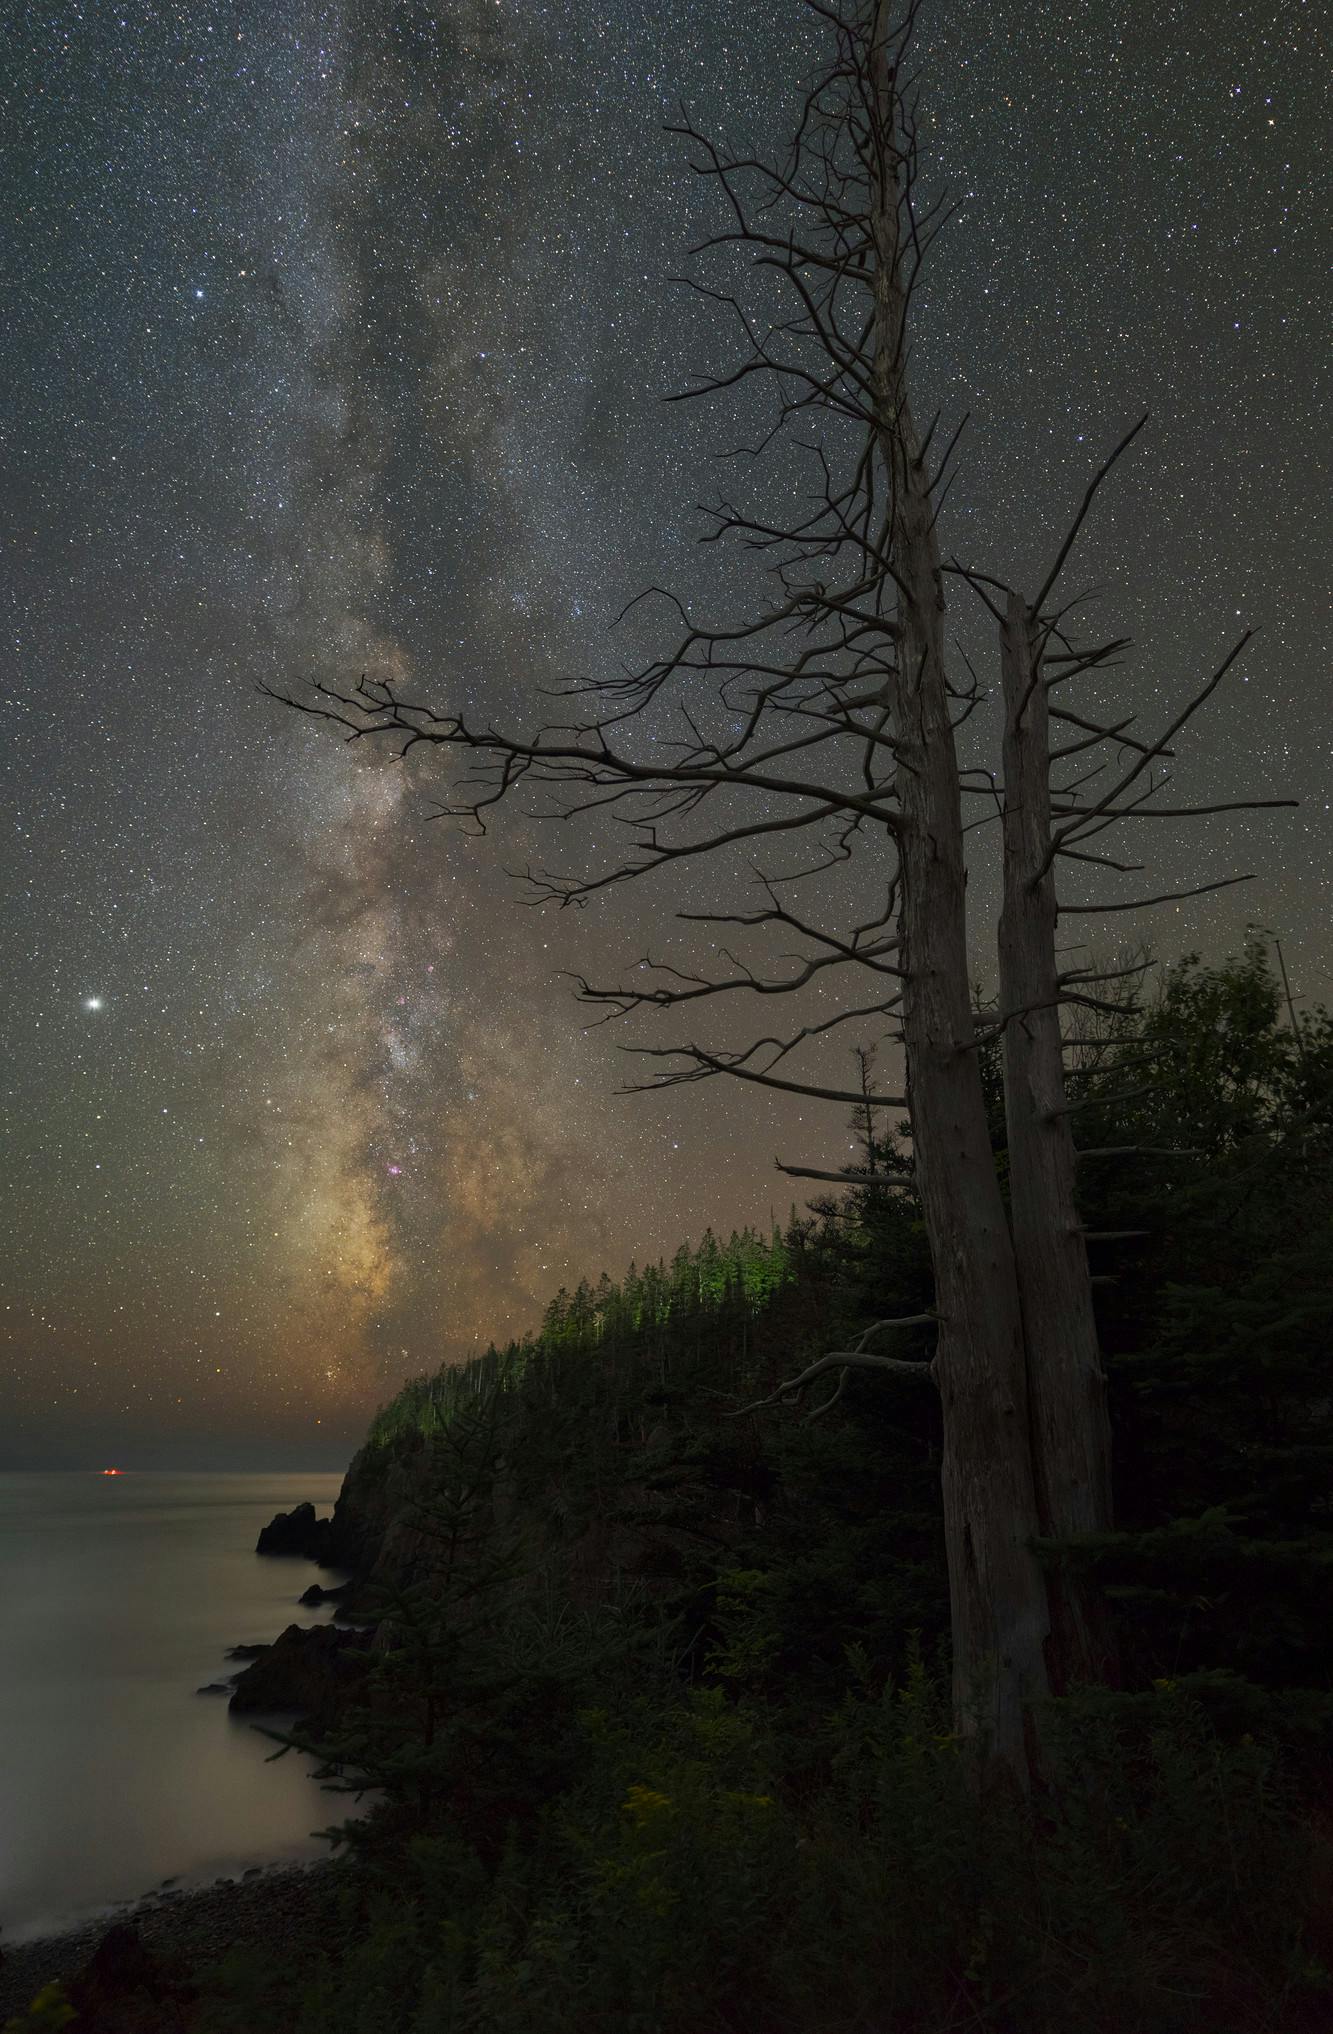 Milky Way and Dead Tree At Gulliver's Hole